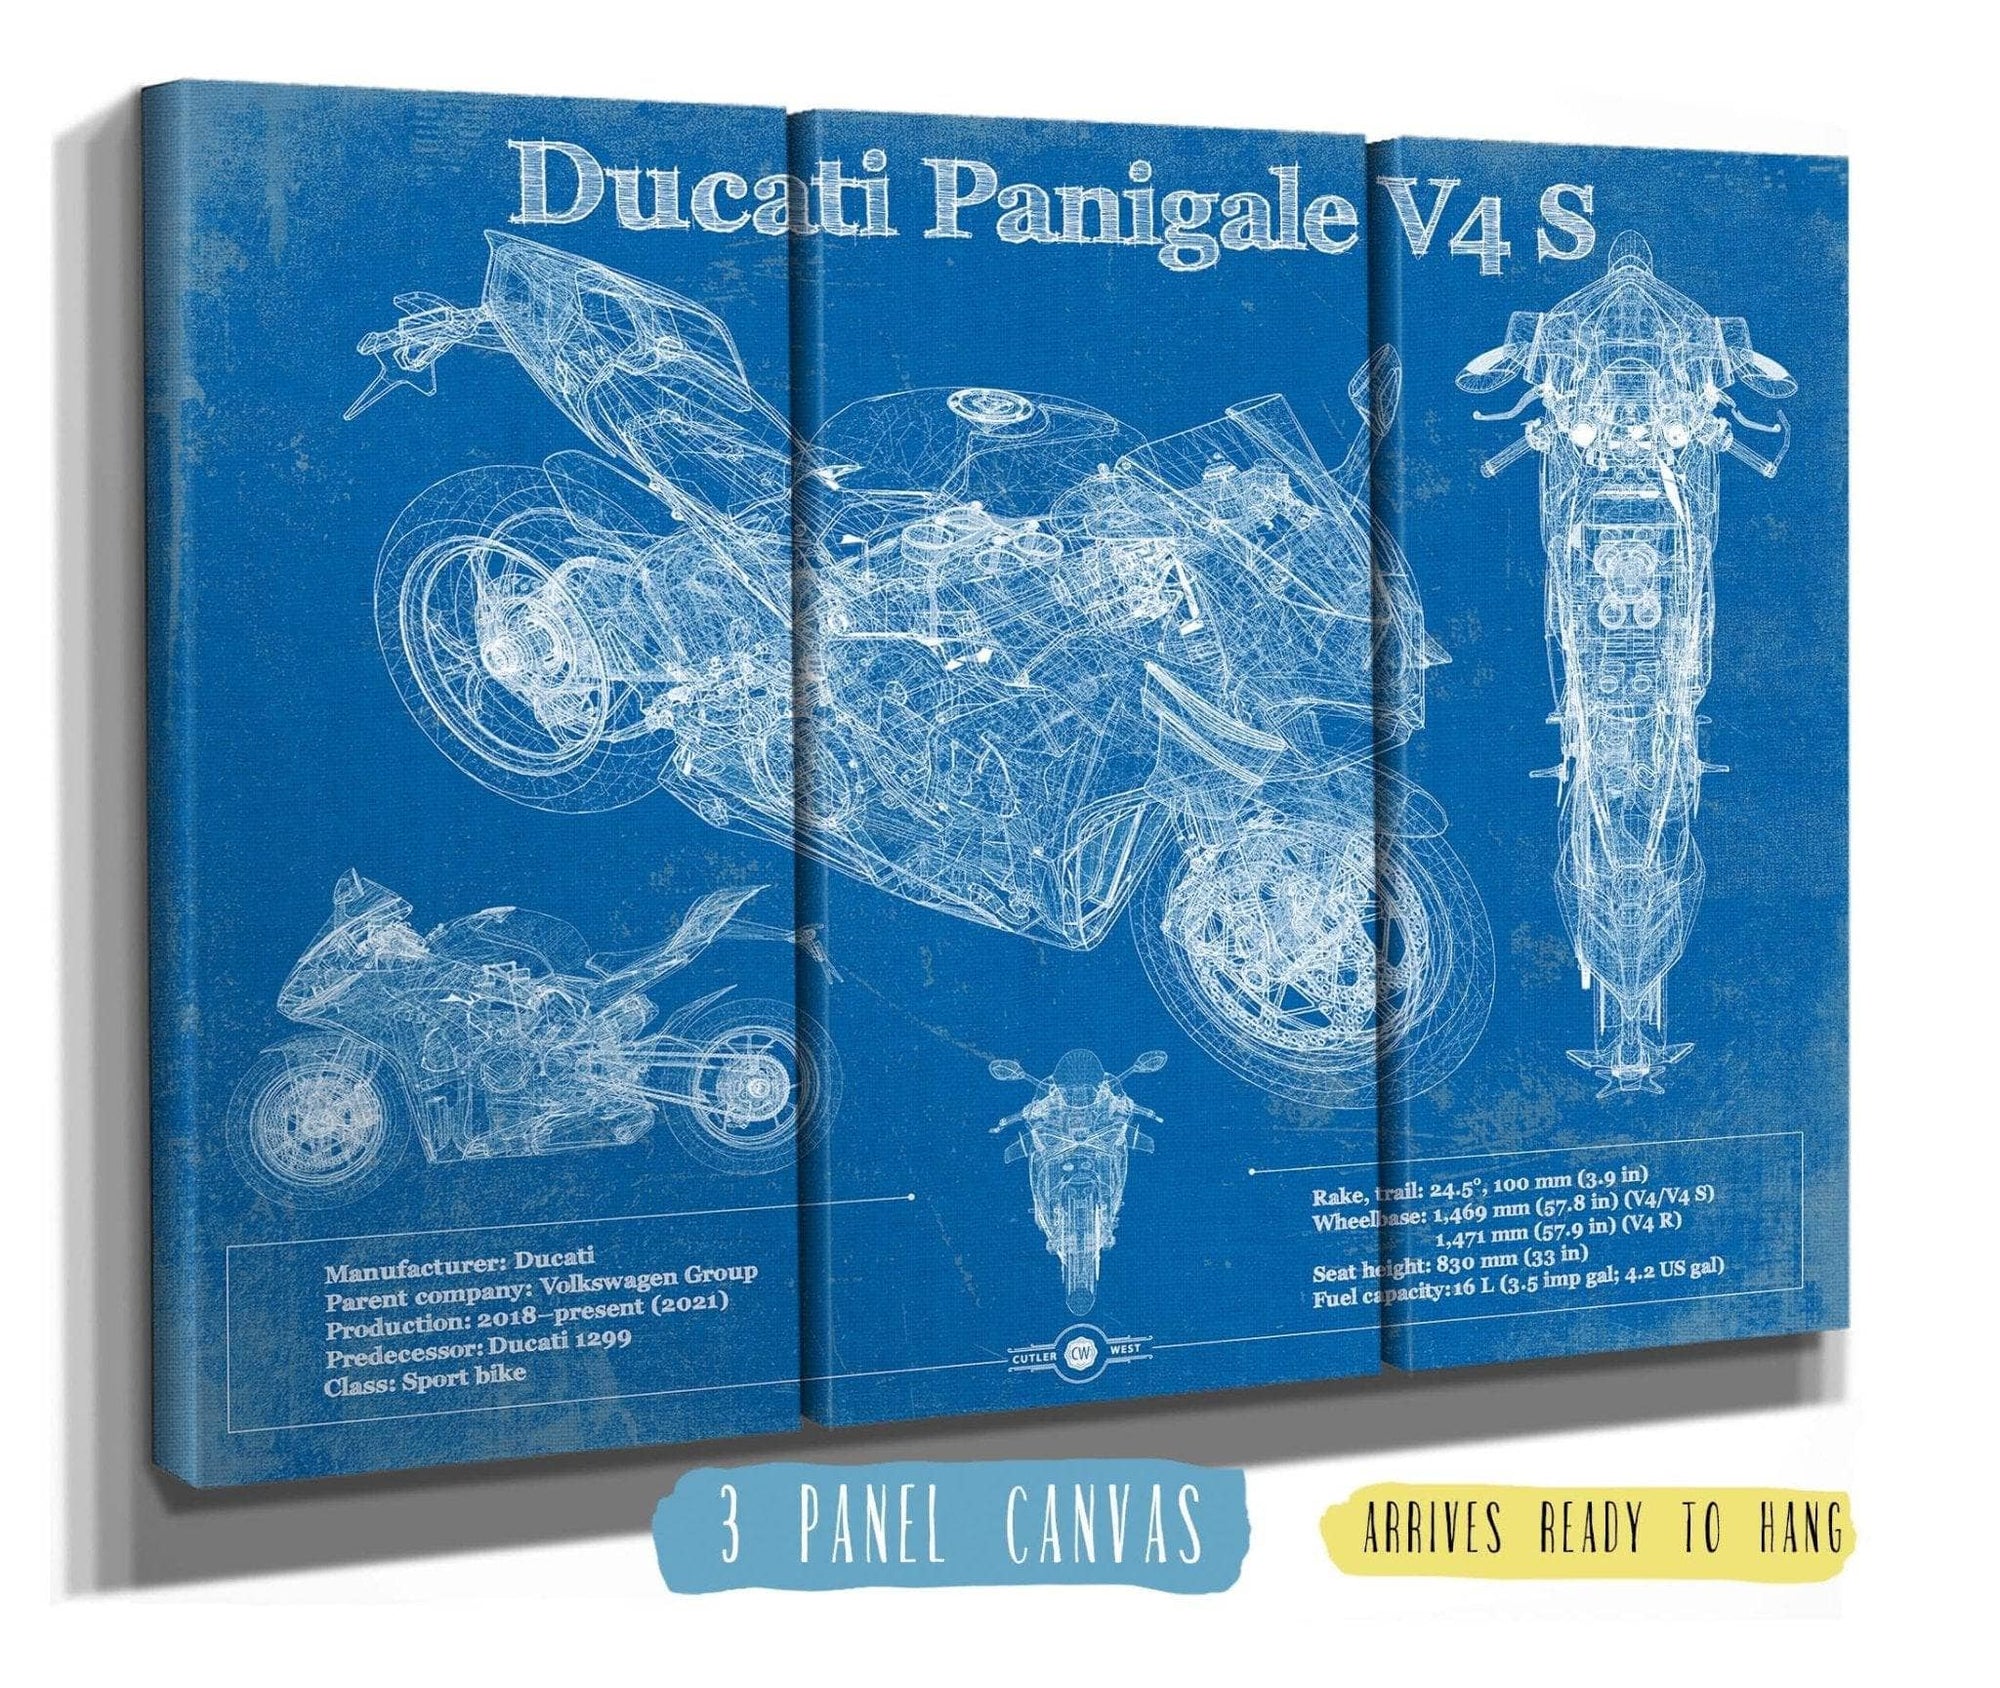 Cutler West 48" x 32" / 3 Panel Canvas Wrap Ducati Streetfighter V4 2020 Blueprint Motorcycle Patent Print 845000240_61393